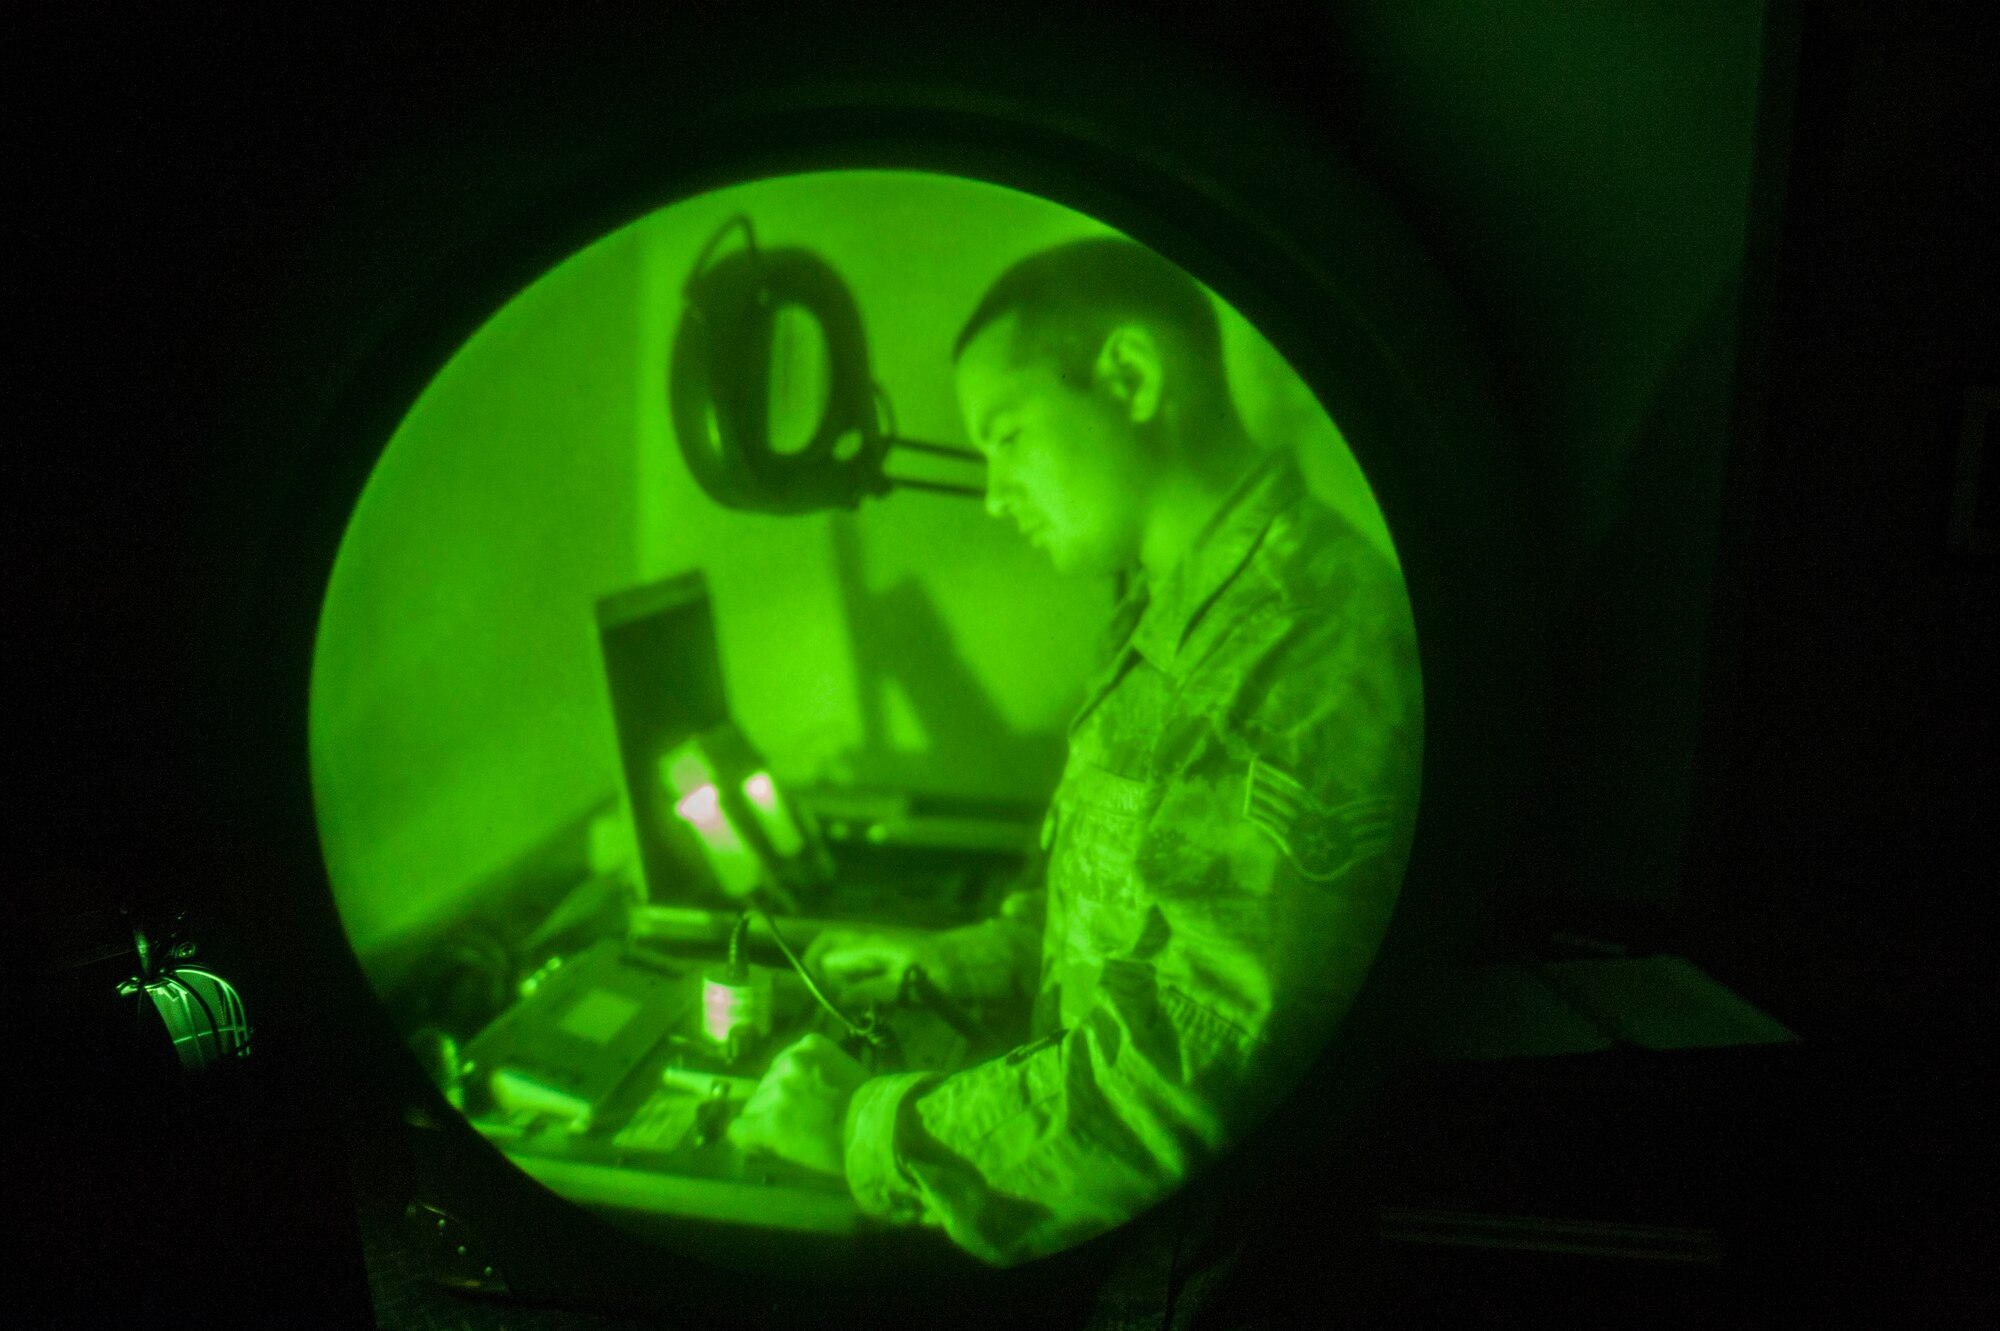 Senior Airman Elias Gallardo-Baez, 436th Operations Support Squadron aircrew flight equipment technician, inspects night vision goggles June 9, 2014, at Dover Air Force Base, Del.  The goggles provide operators improved situational awareness during periods of low natural illumination by amplifying light from the moon and stars. (U.S. Air Force photo/Senior Airman Jared Duhon)